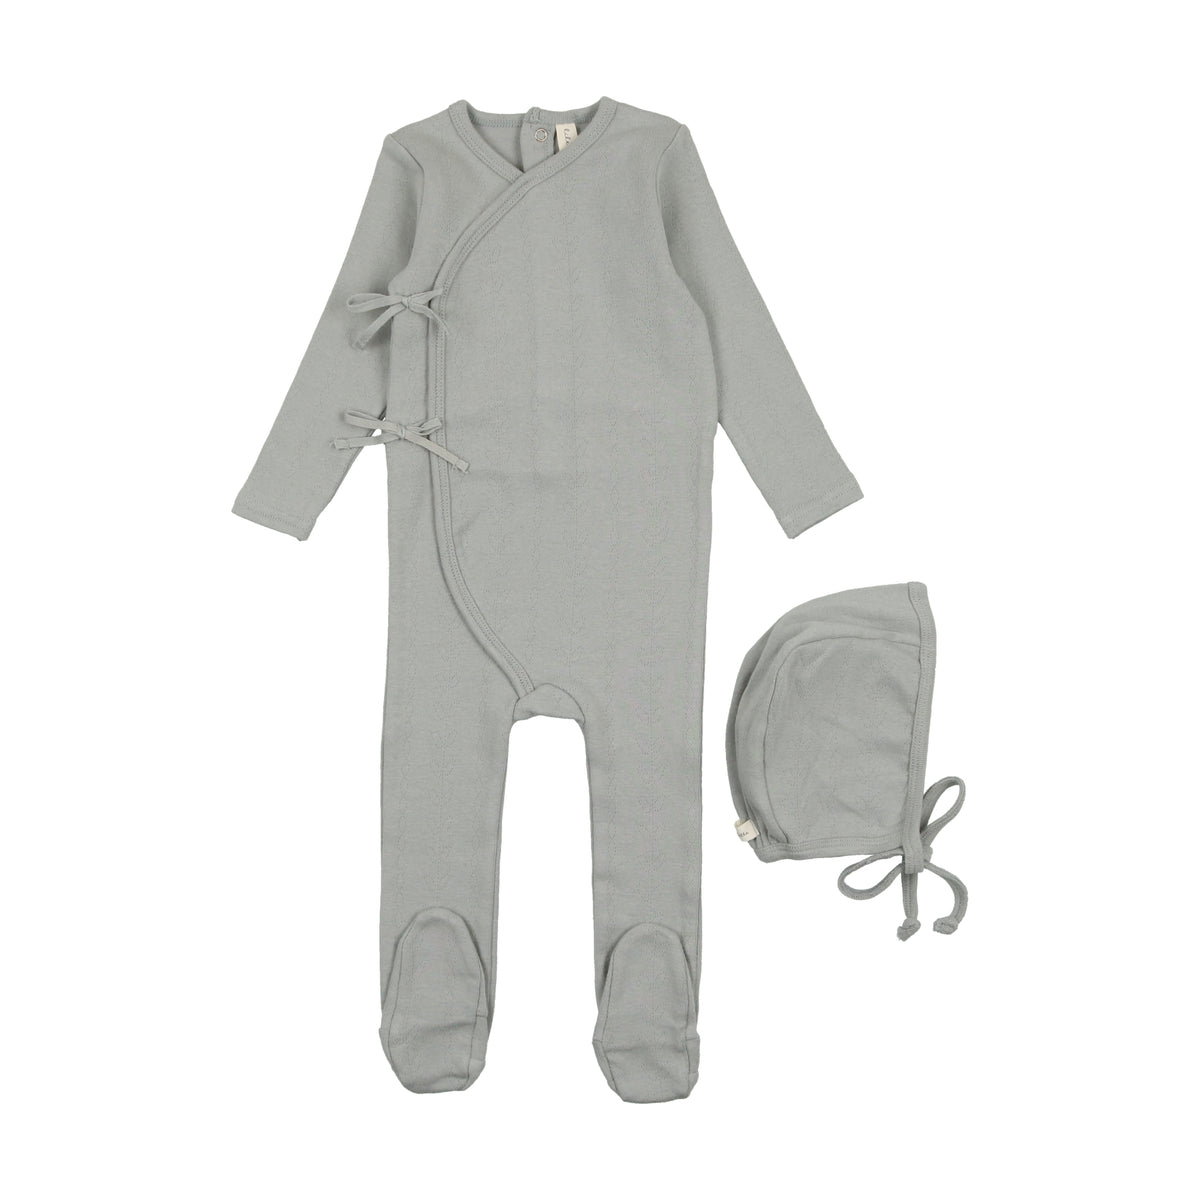 BRUSHED COTTON WRAPOVER FOOTIE SET